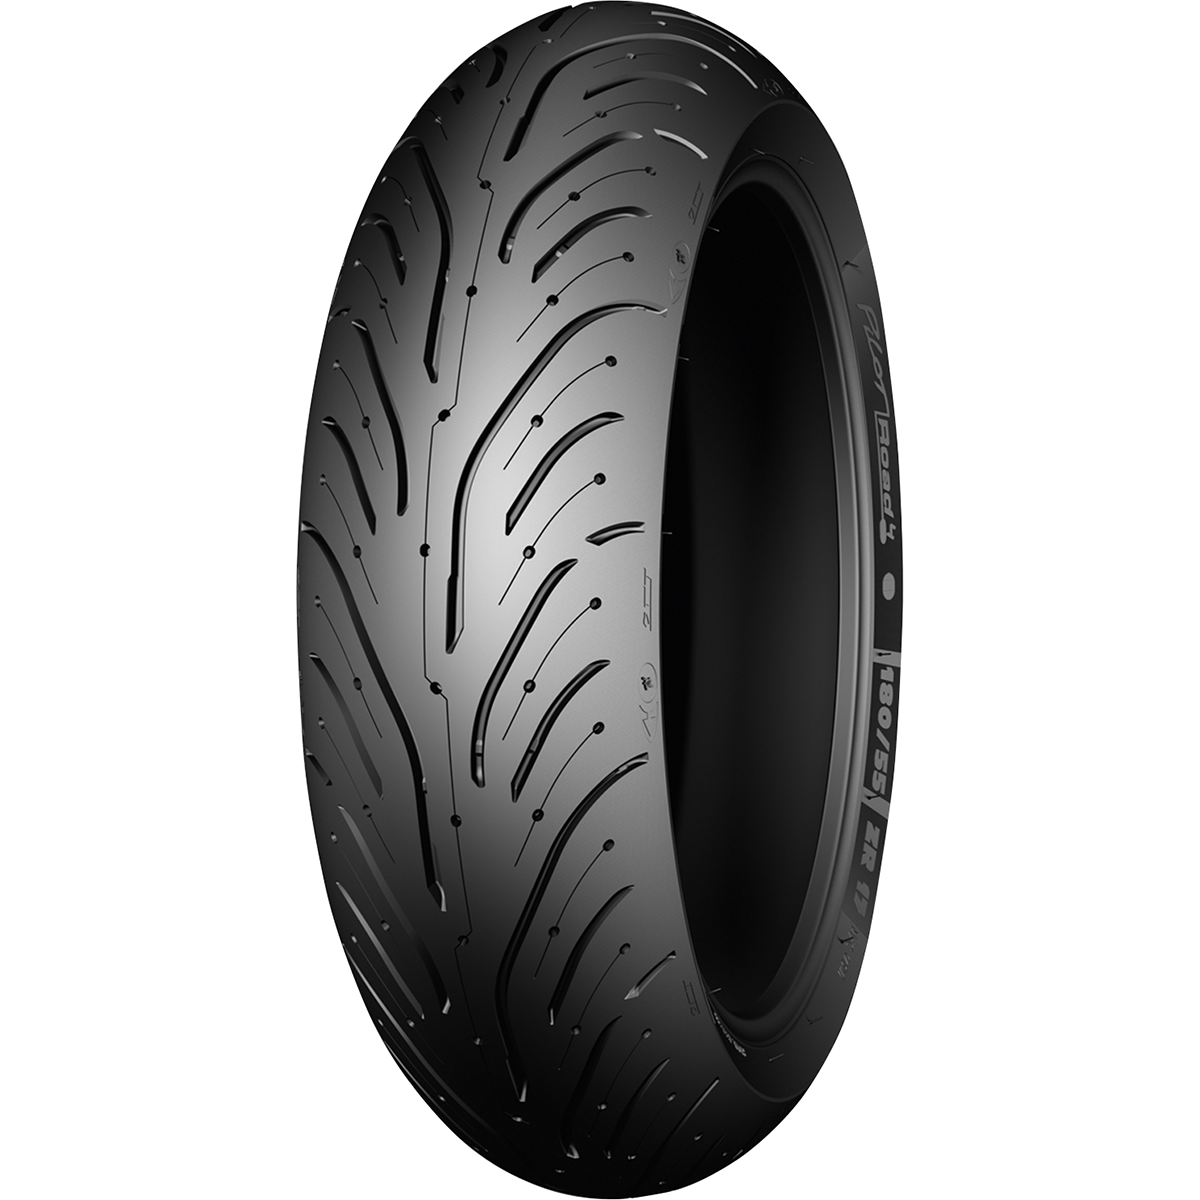 Michelin Tire Road 4 160 60zr17 69w Aftermarket Powersports And Motorcycle Parts Accessories And Gear